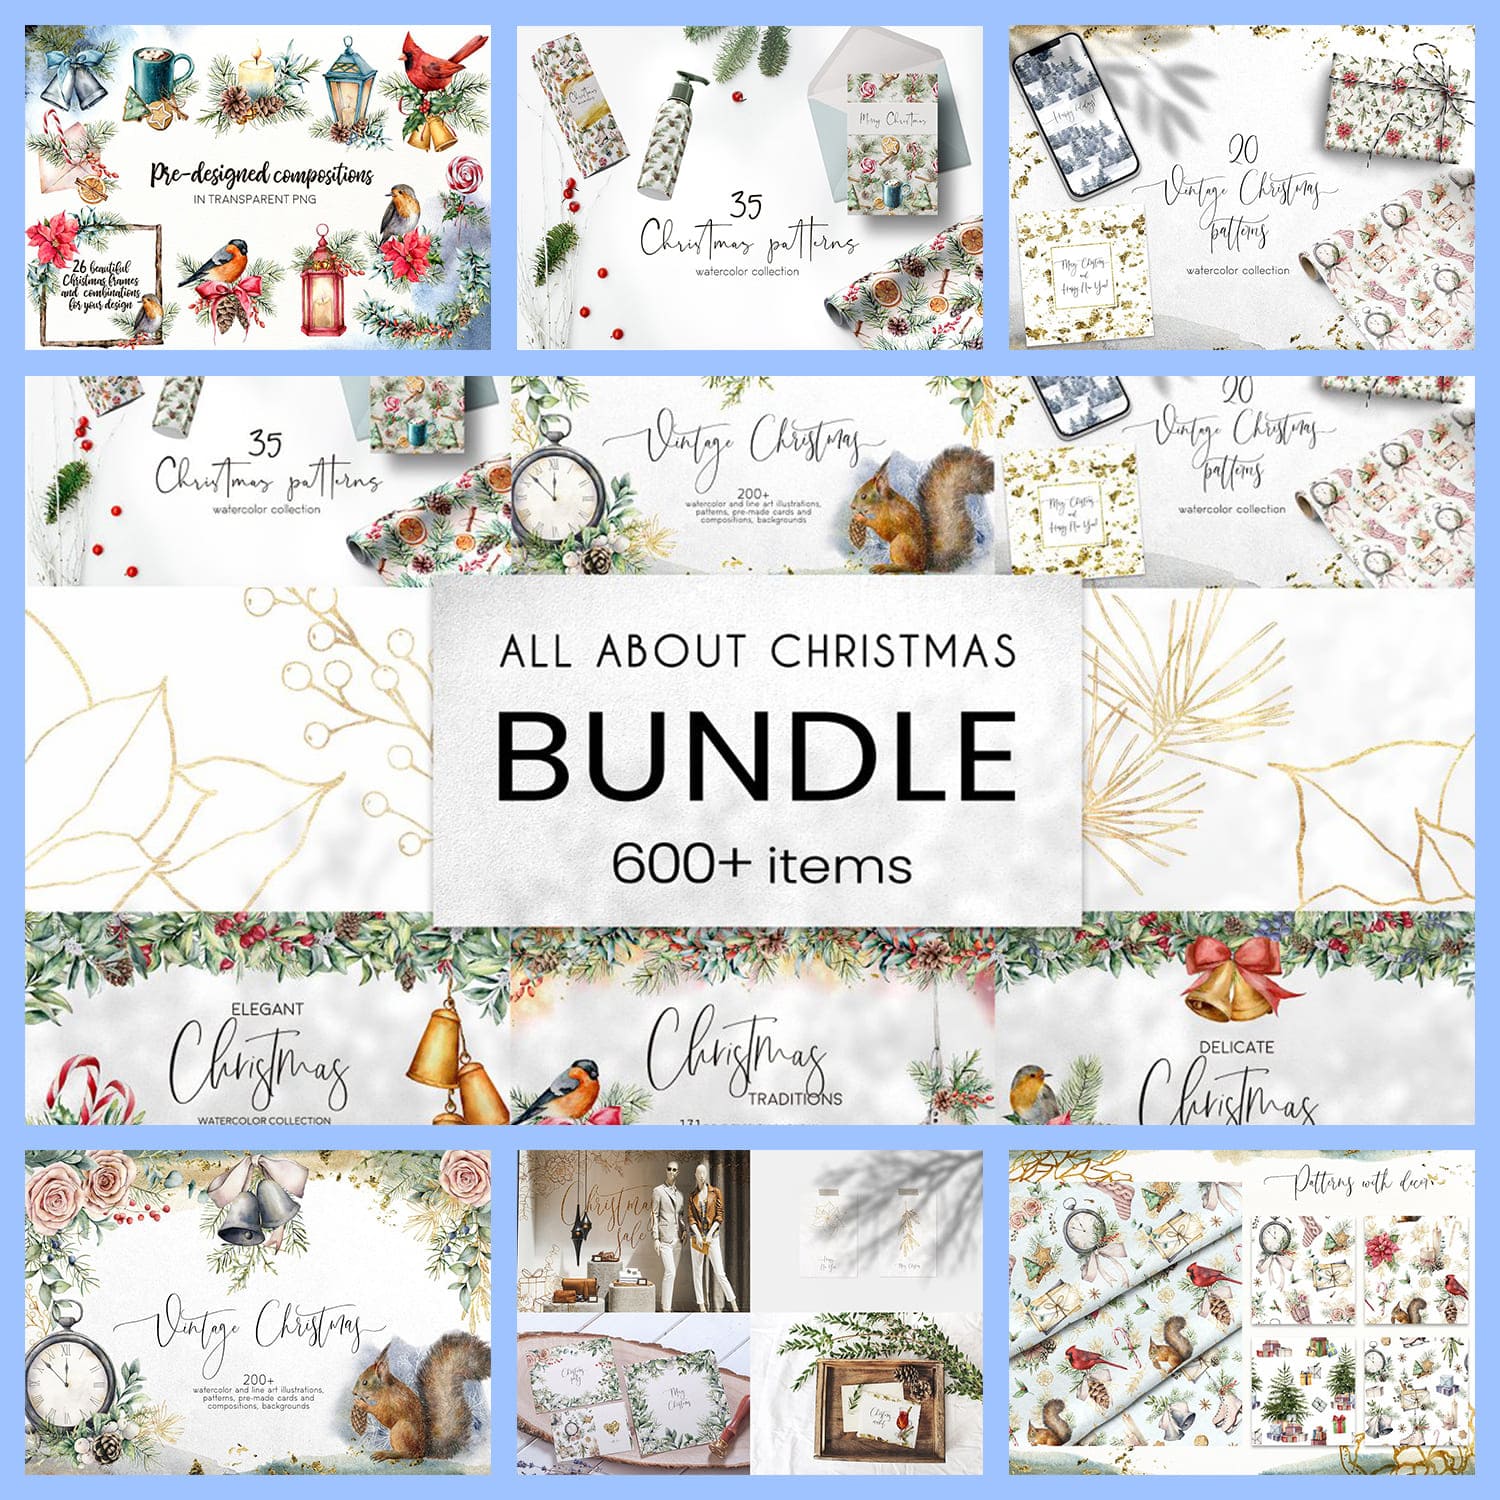 All About Christmas Bundle 600+ Items.